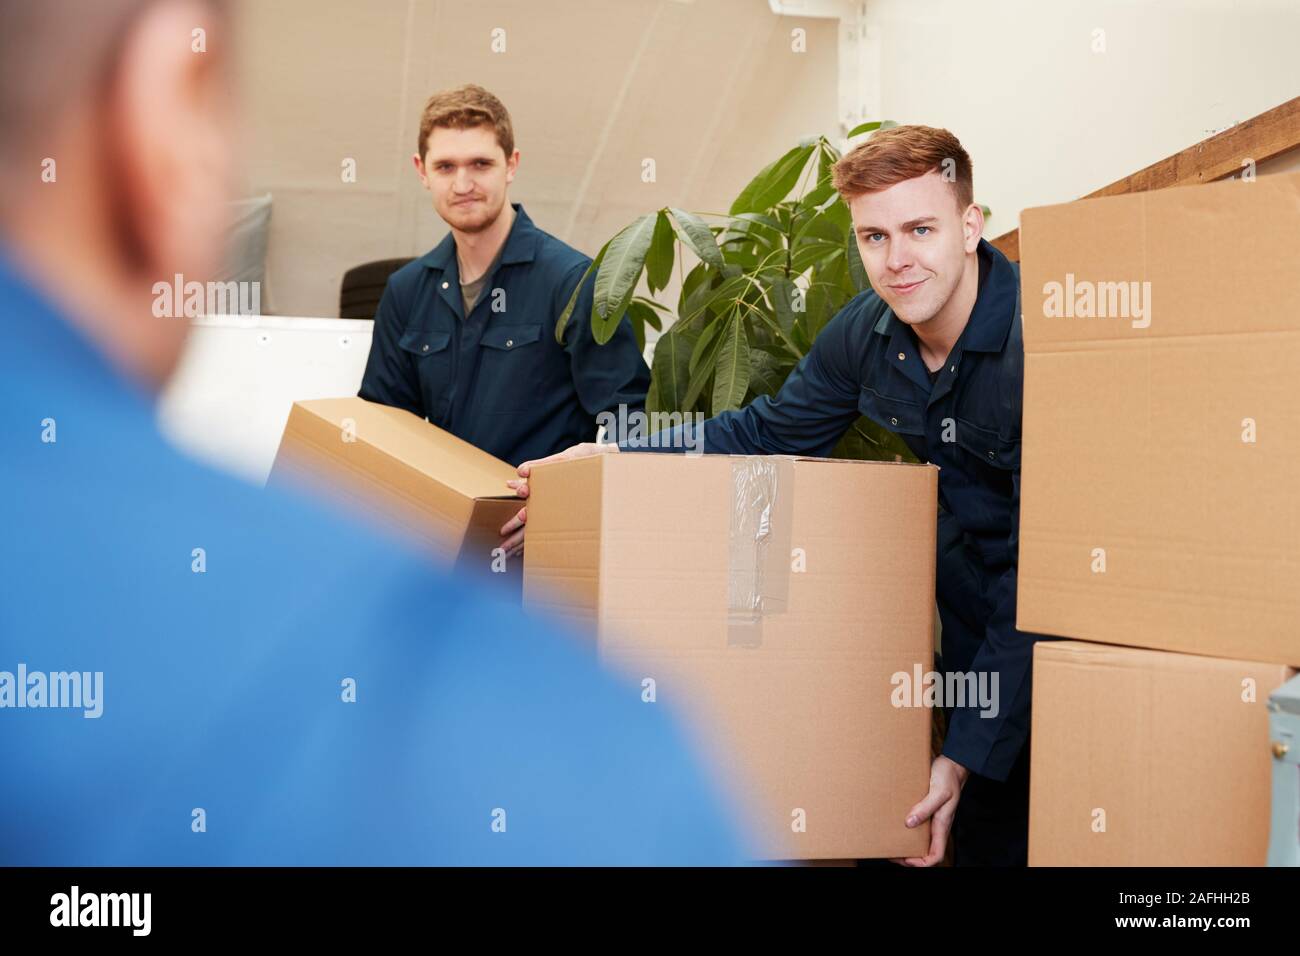 Removal Company Workers Unloading Furniture And Boxes From Truck Into New Home On Moving Day Stock Photo